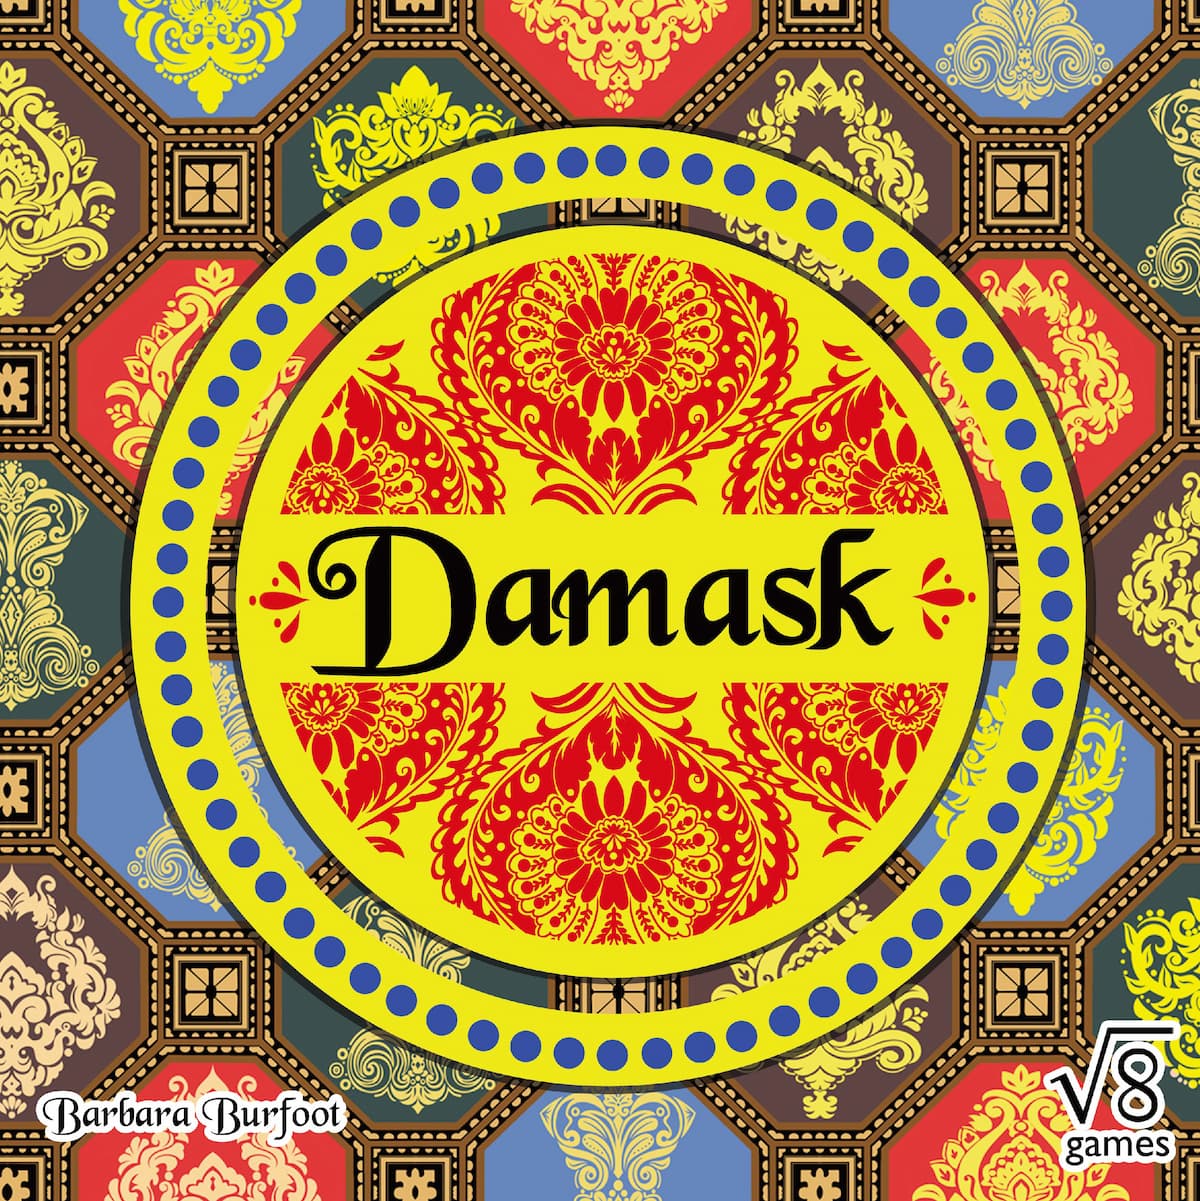 Damask the board game was manufactured by Boda Games Manufacturing.